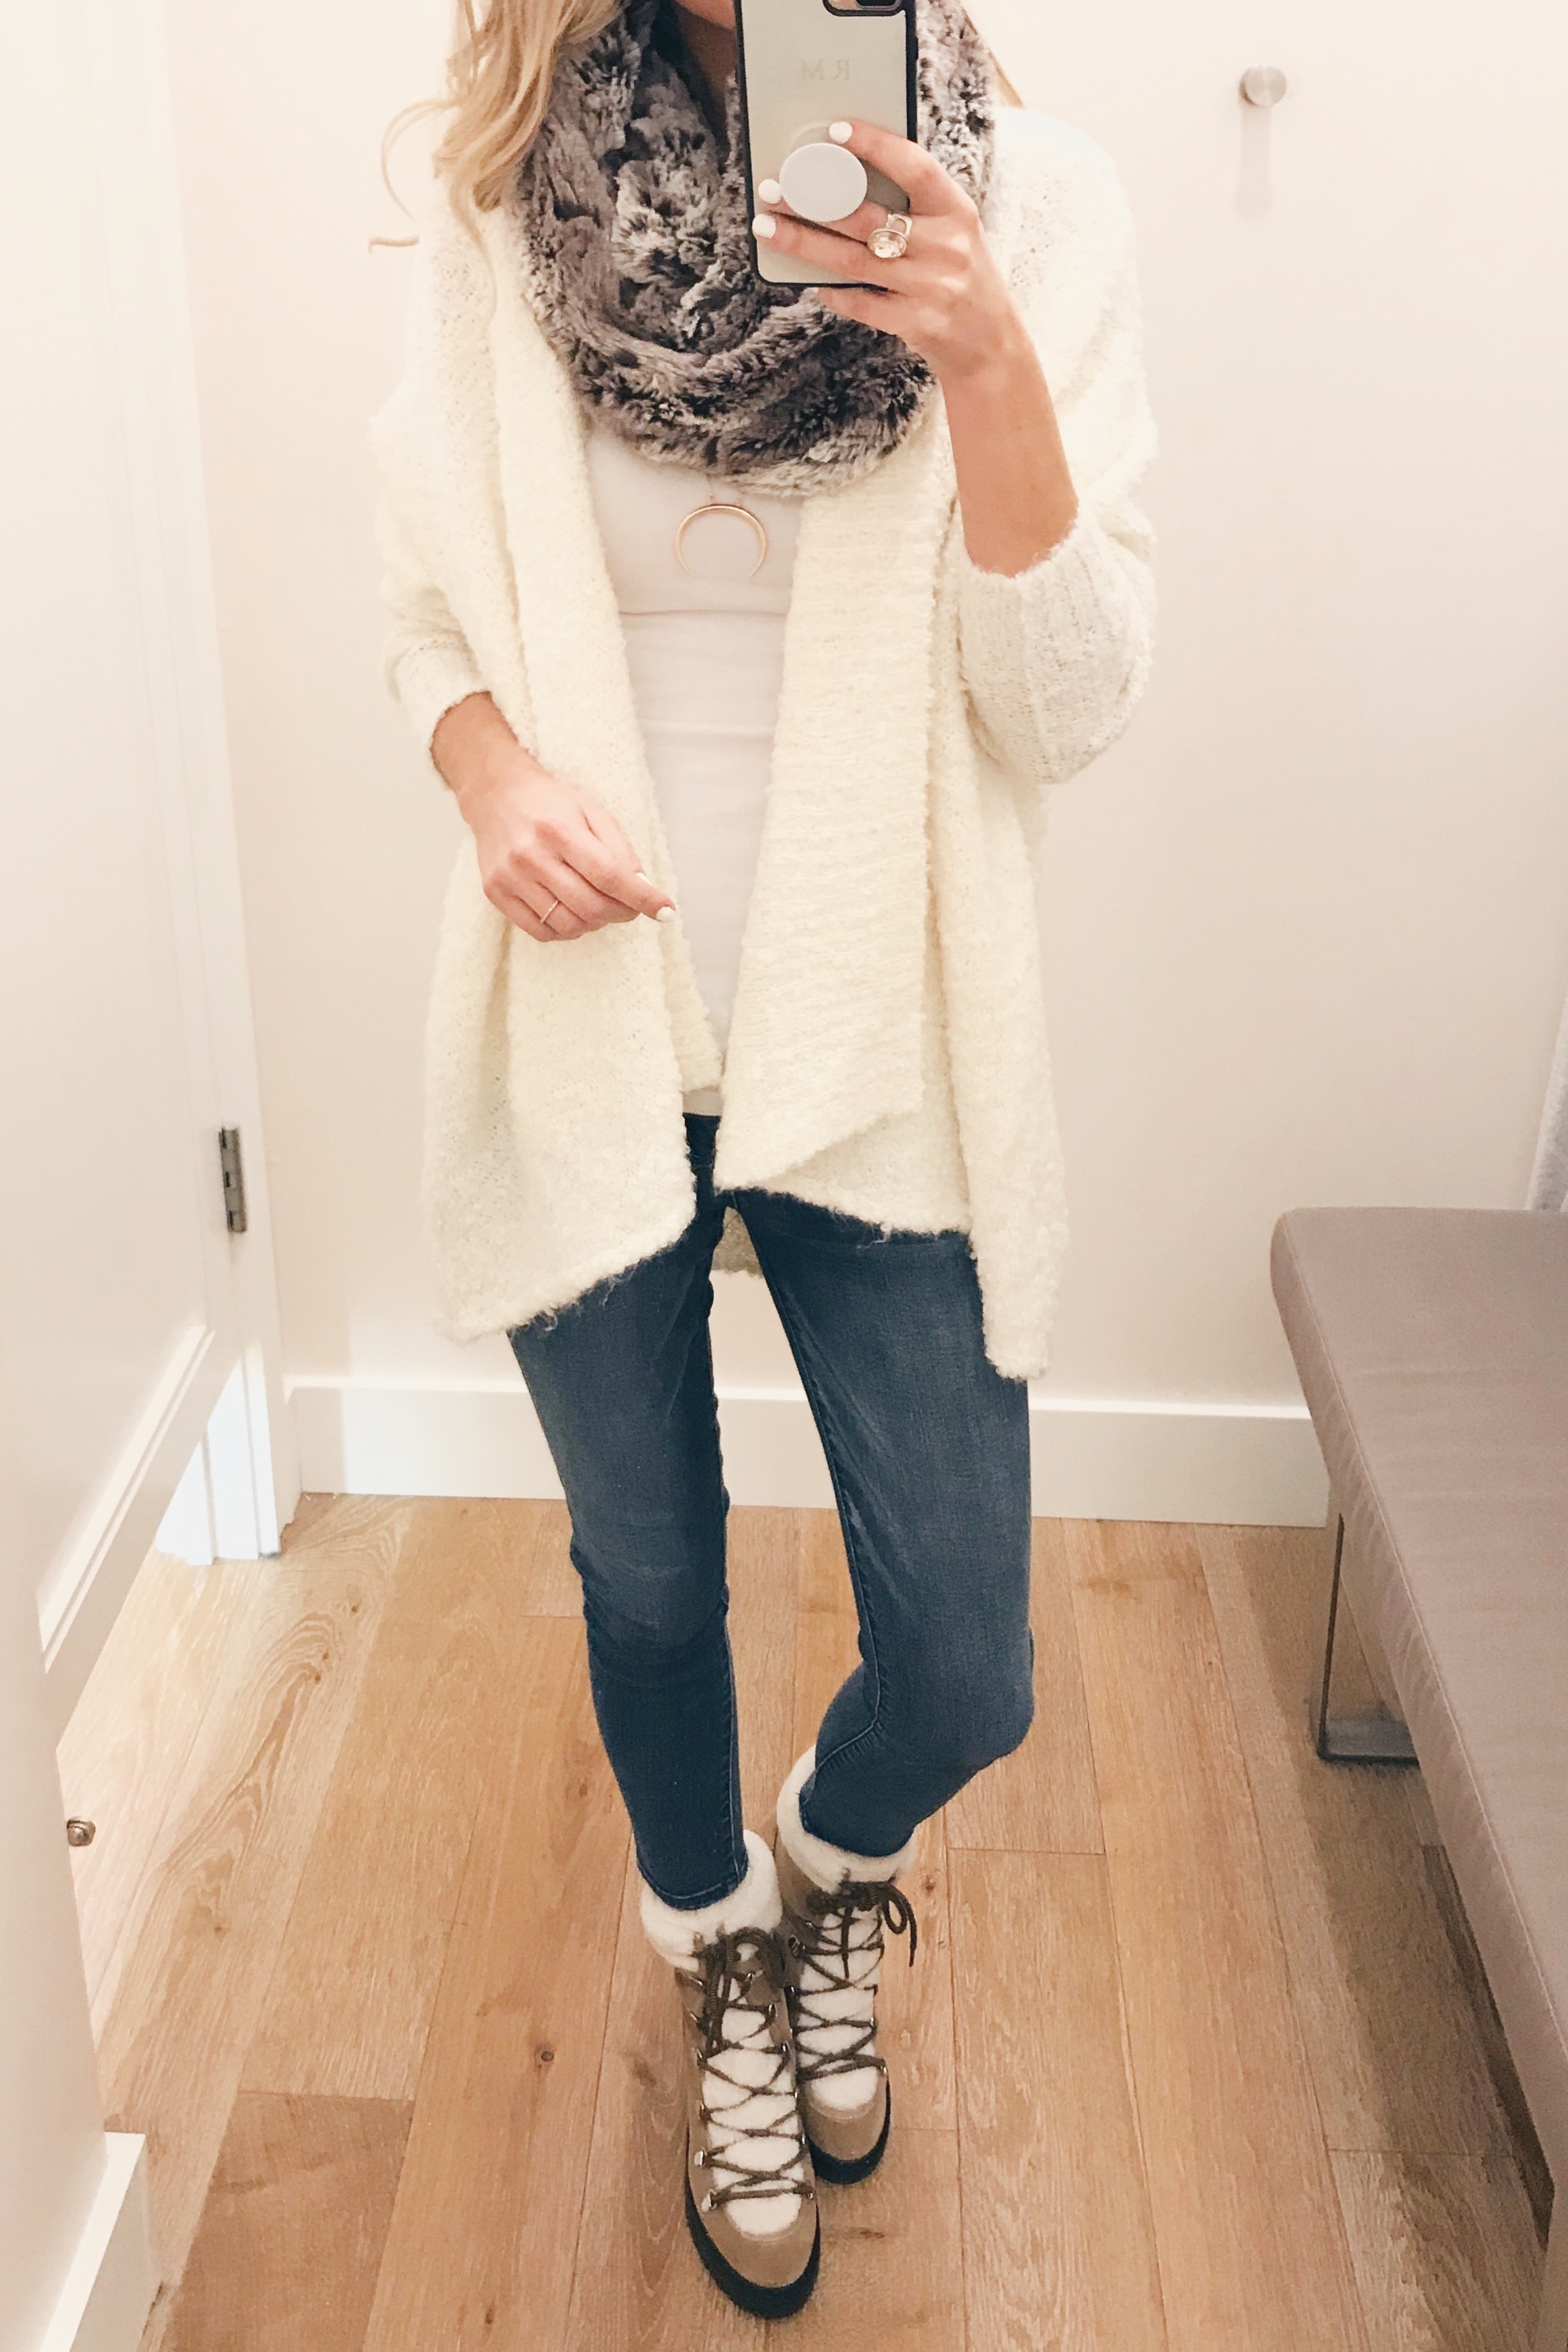 Veteran's Day Weekend Sale round up - ivory cardigan and faux fur infinity scarf on sale